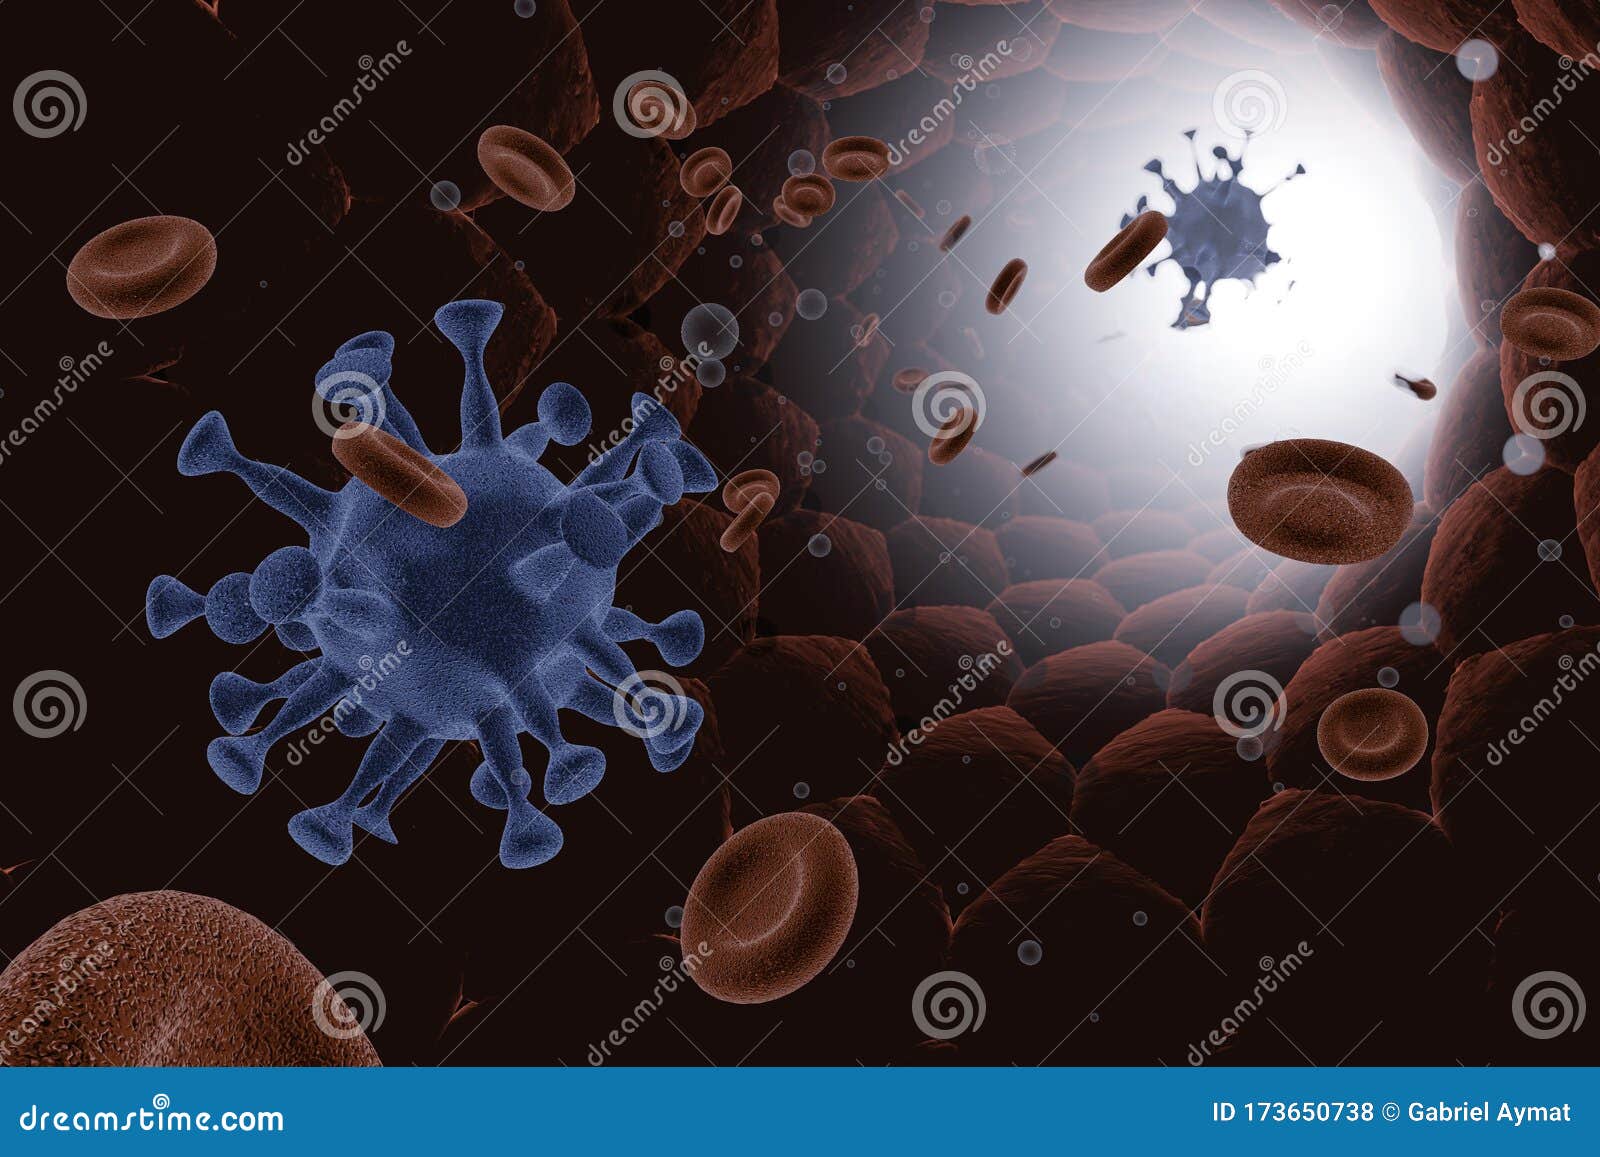 bloodstream virus and bacteria. microbiology and virology . 3d rendering ilustracion